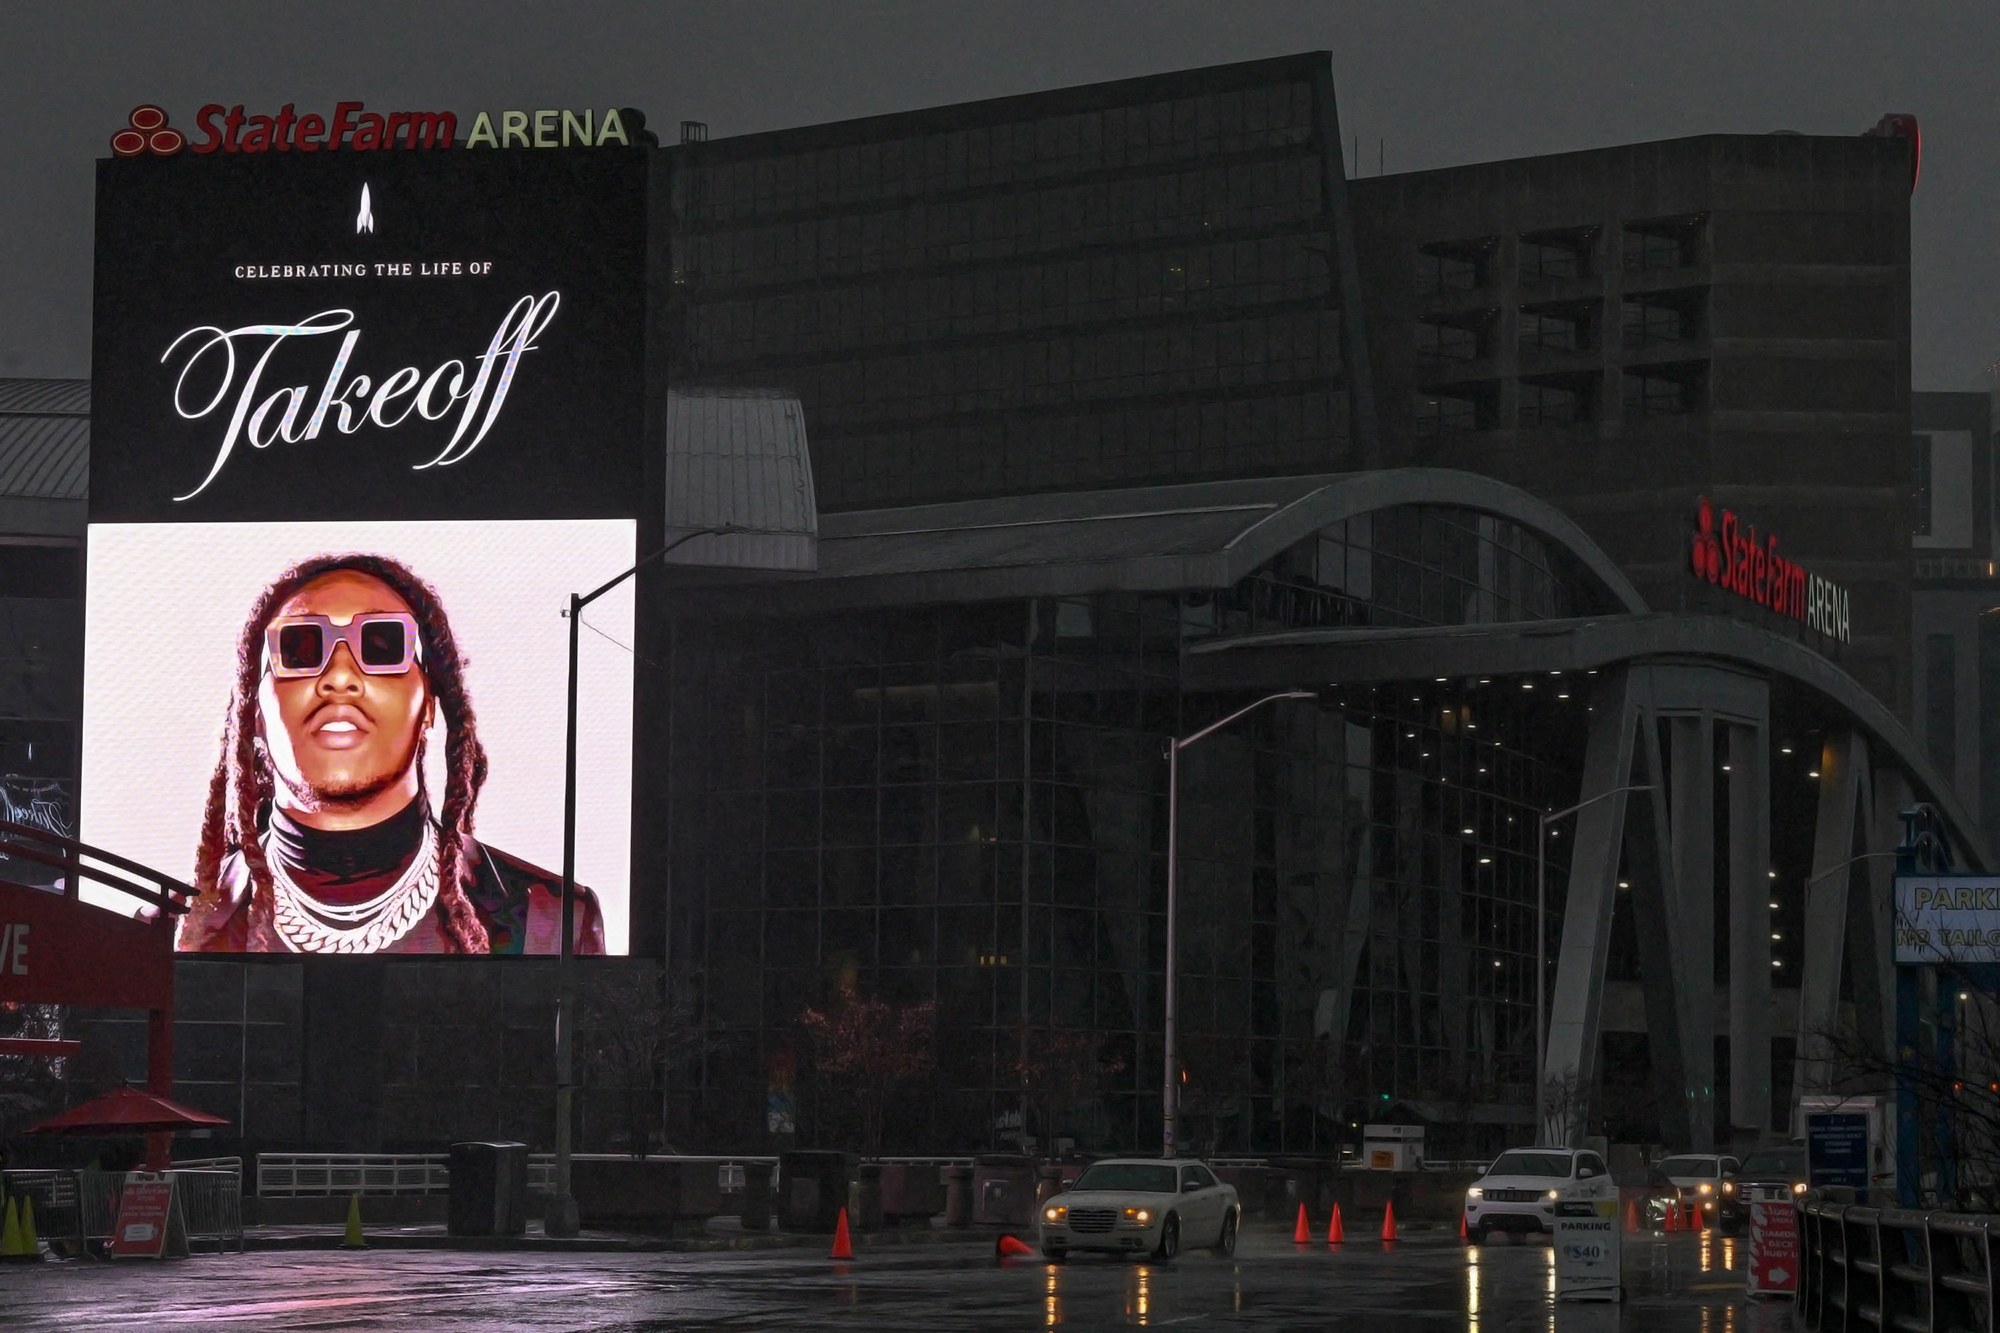 EXCLUSIVE: Large screen lights up Atlanta's State Farm Arena on morning of rapper Takeoff's funeral.